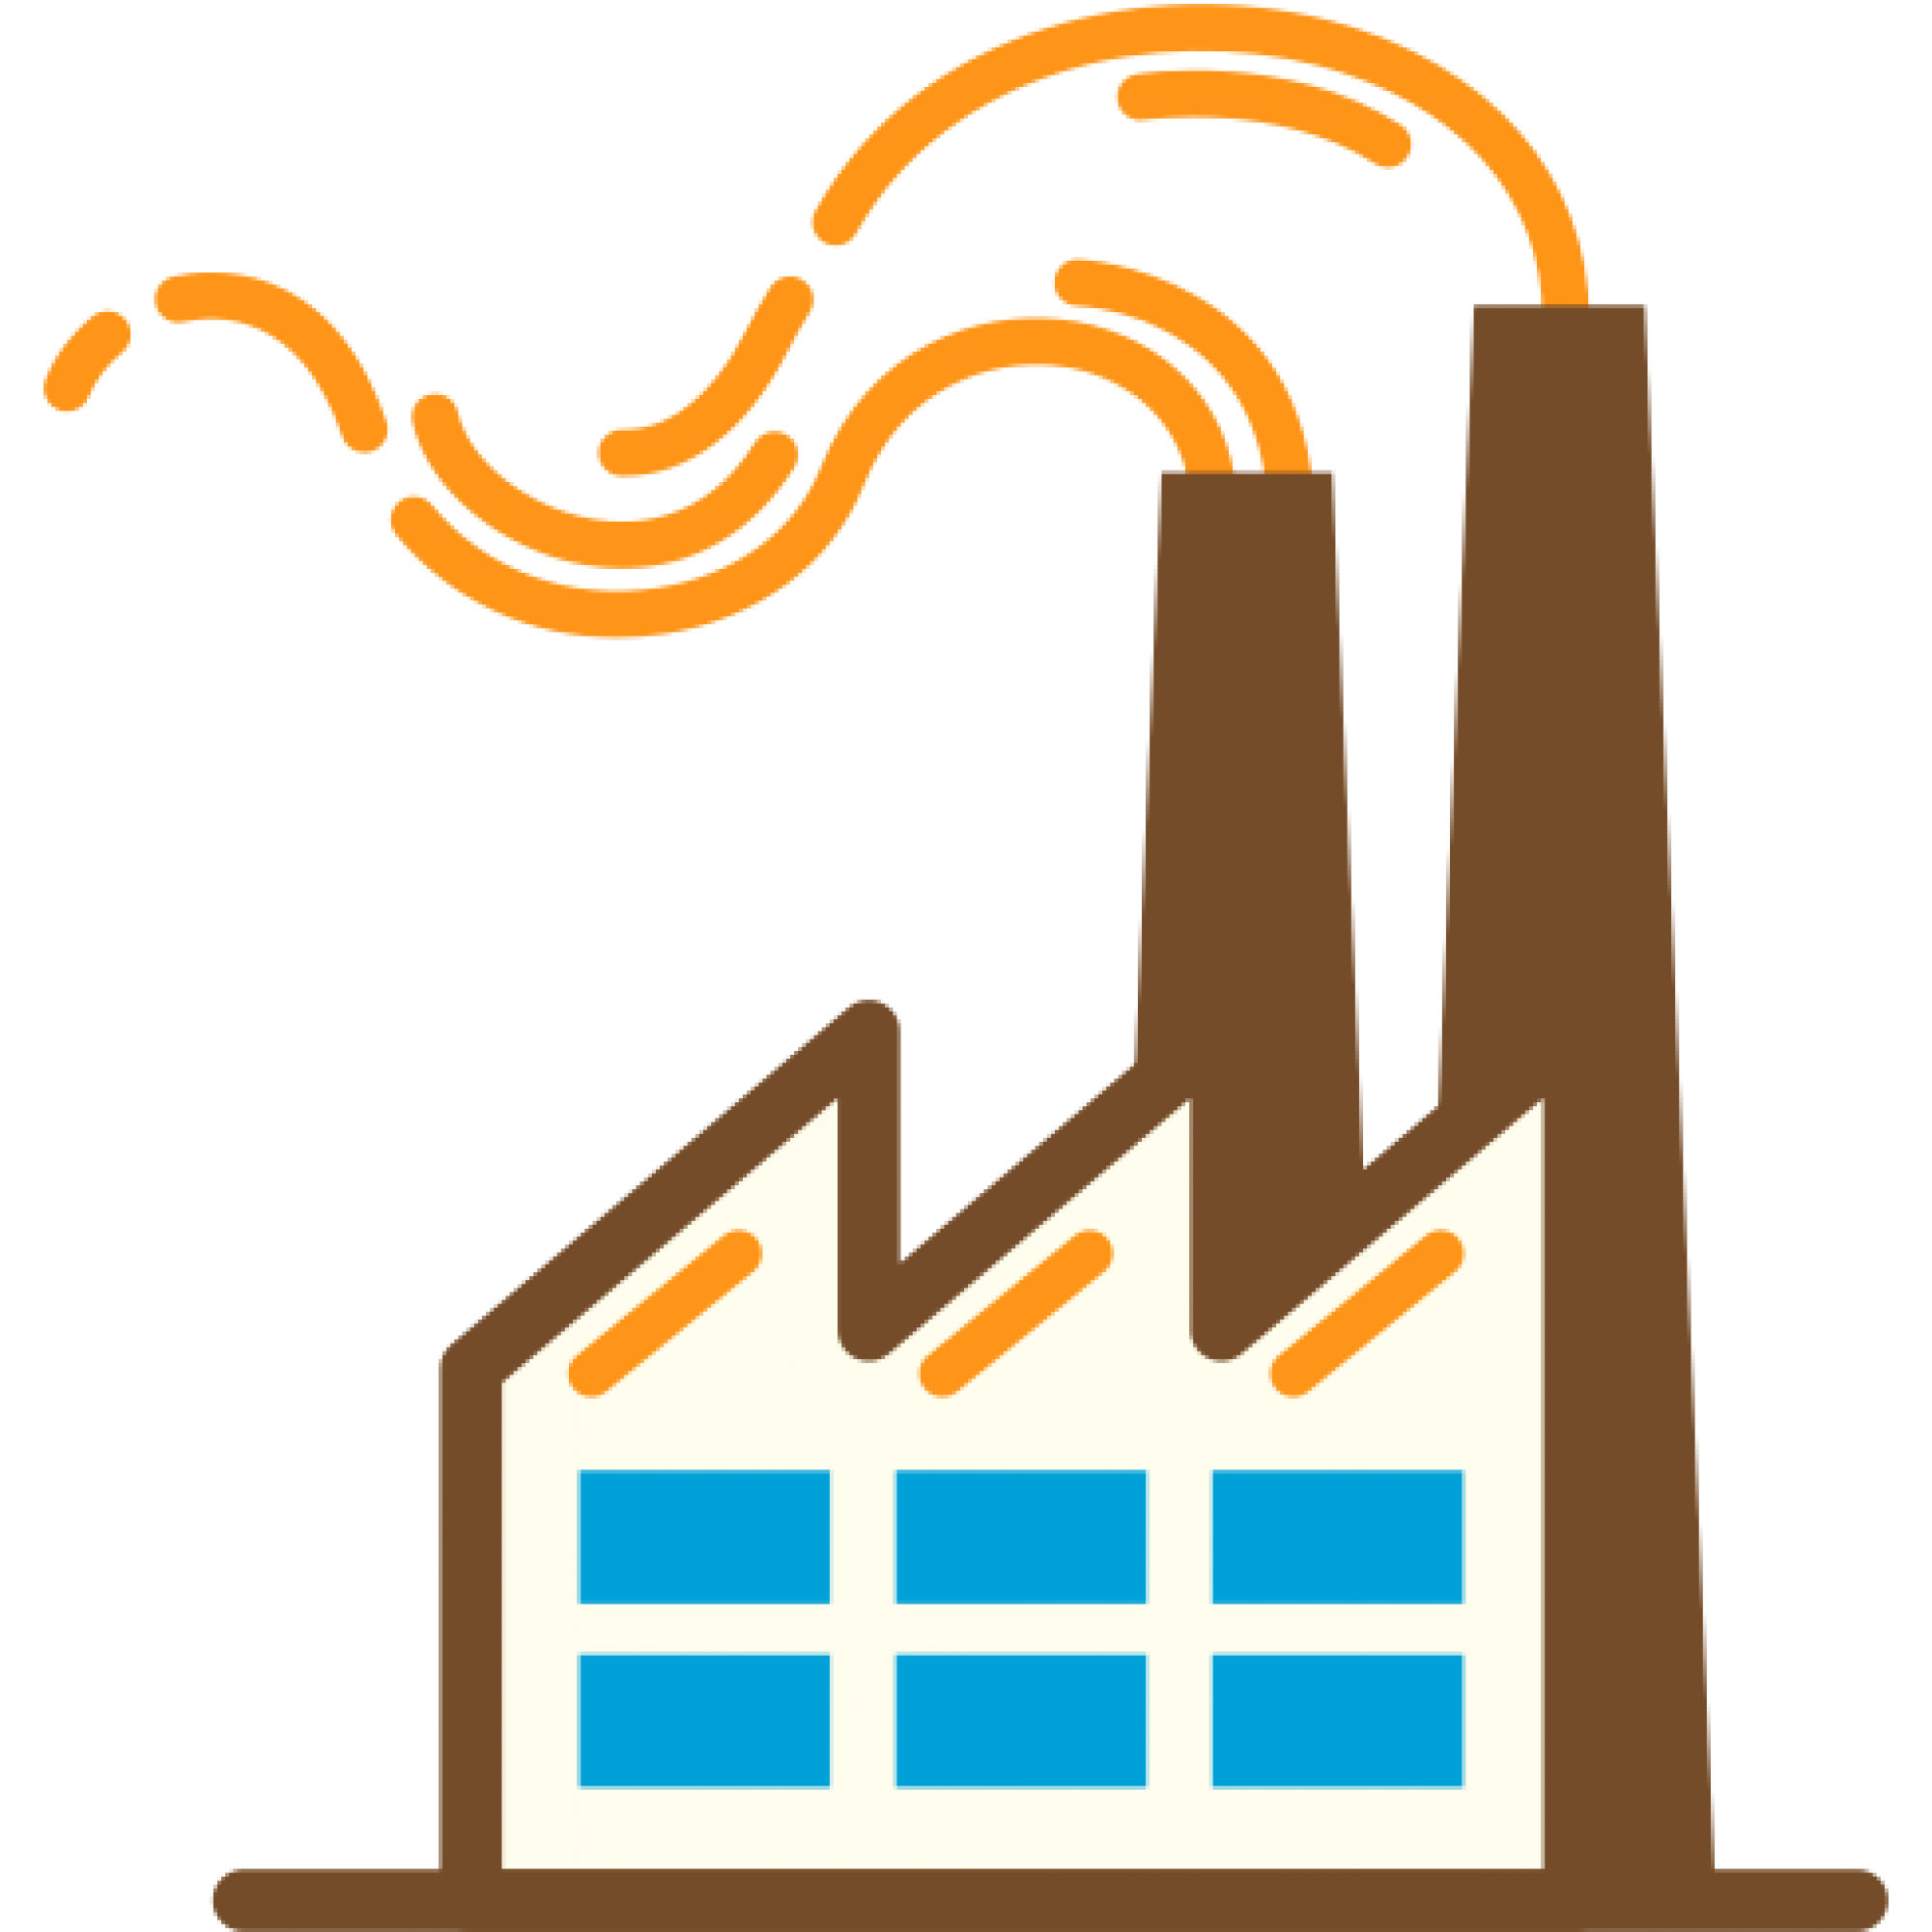 factory_pollution_chimneys_icon_124151